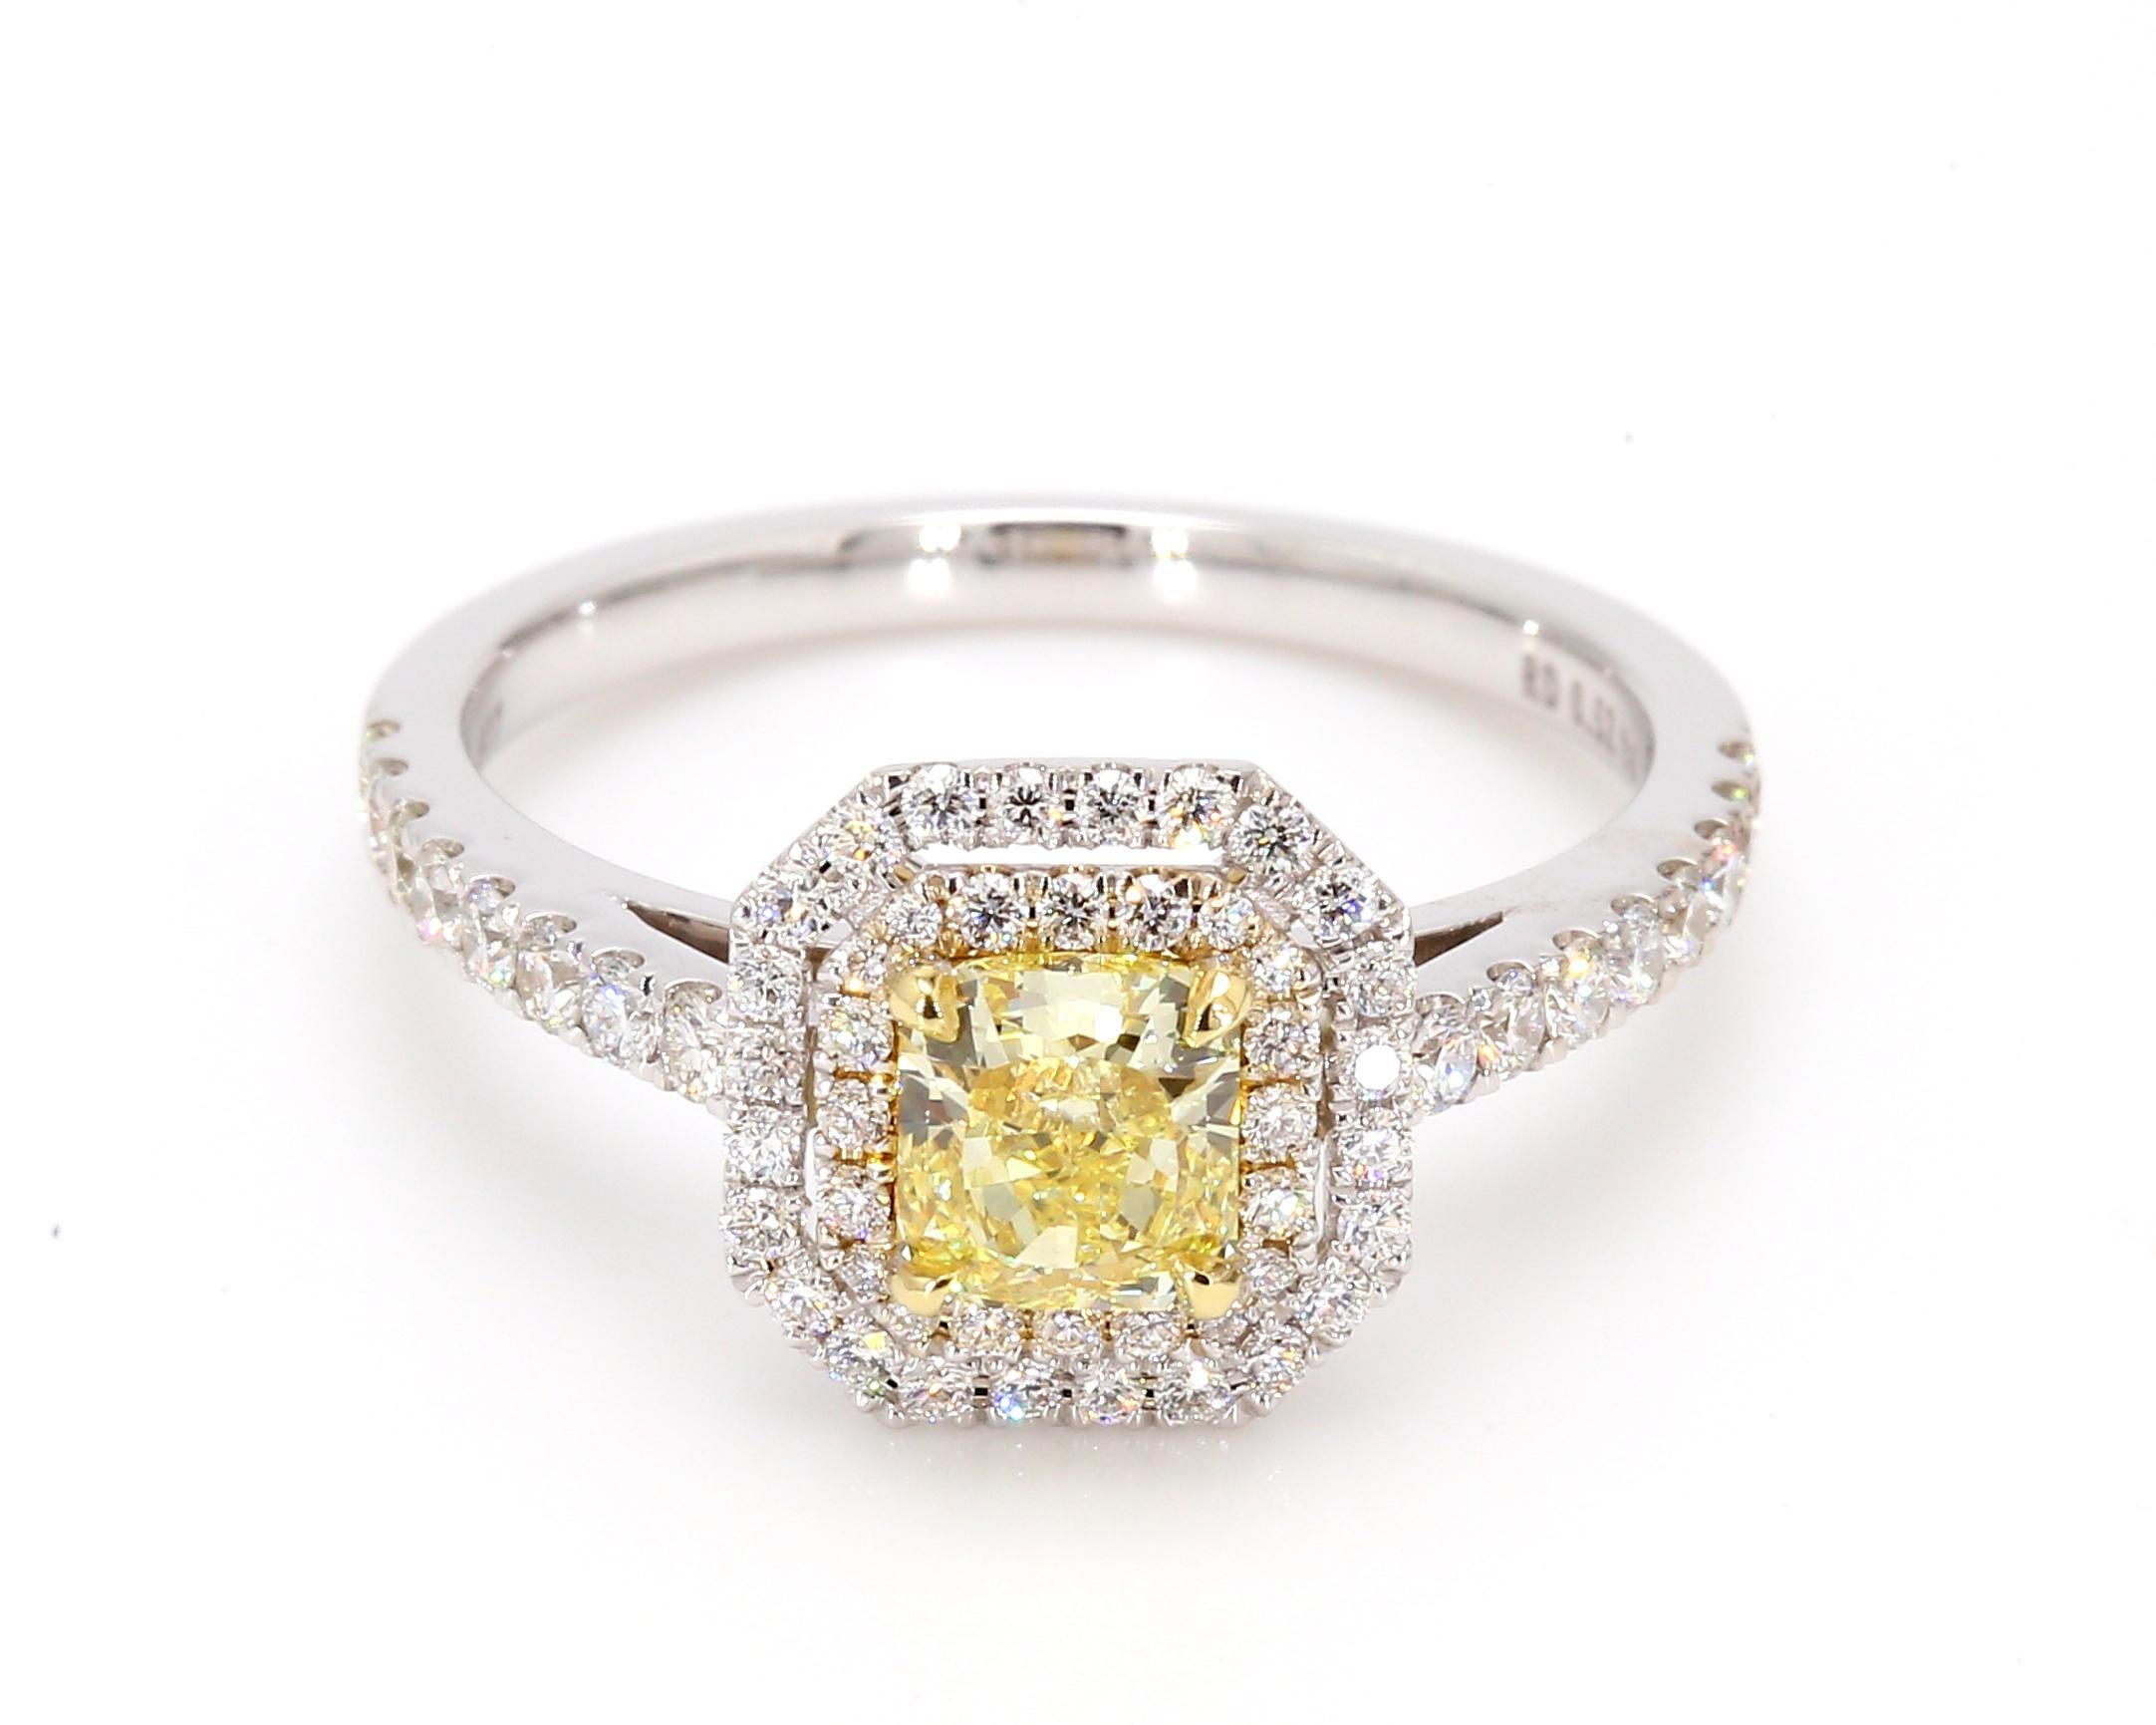 Stunning Double Halo Fancy Yellow Diamond Engagement Ring, featuring:
✧ 0.84 carat natural GIA certified Asscher cut fancy yellow VVS1 clarity, weighing 0.84 carat
✧ Approx. 3.8 grams of 18K White Gold
✧ Original GIA certificate included with your